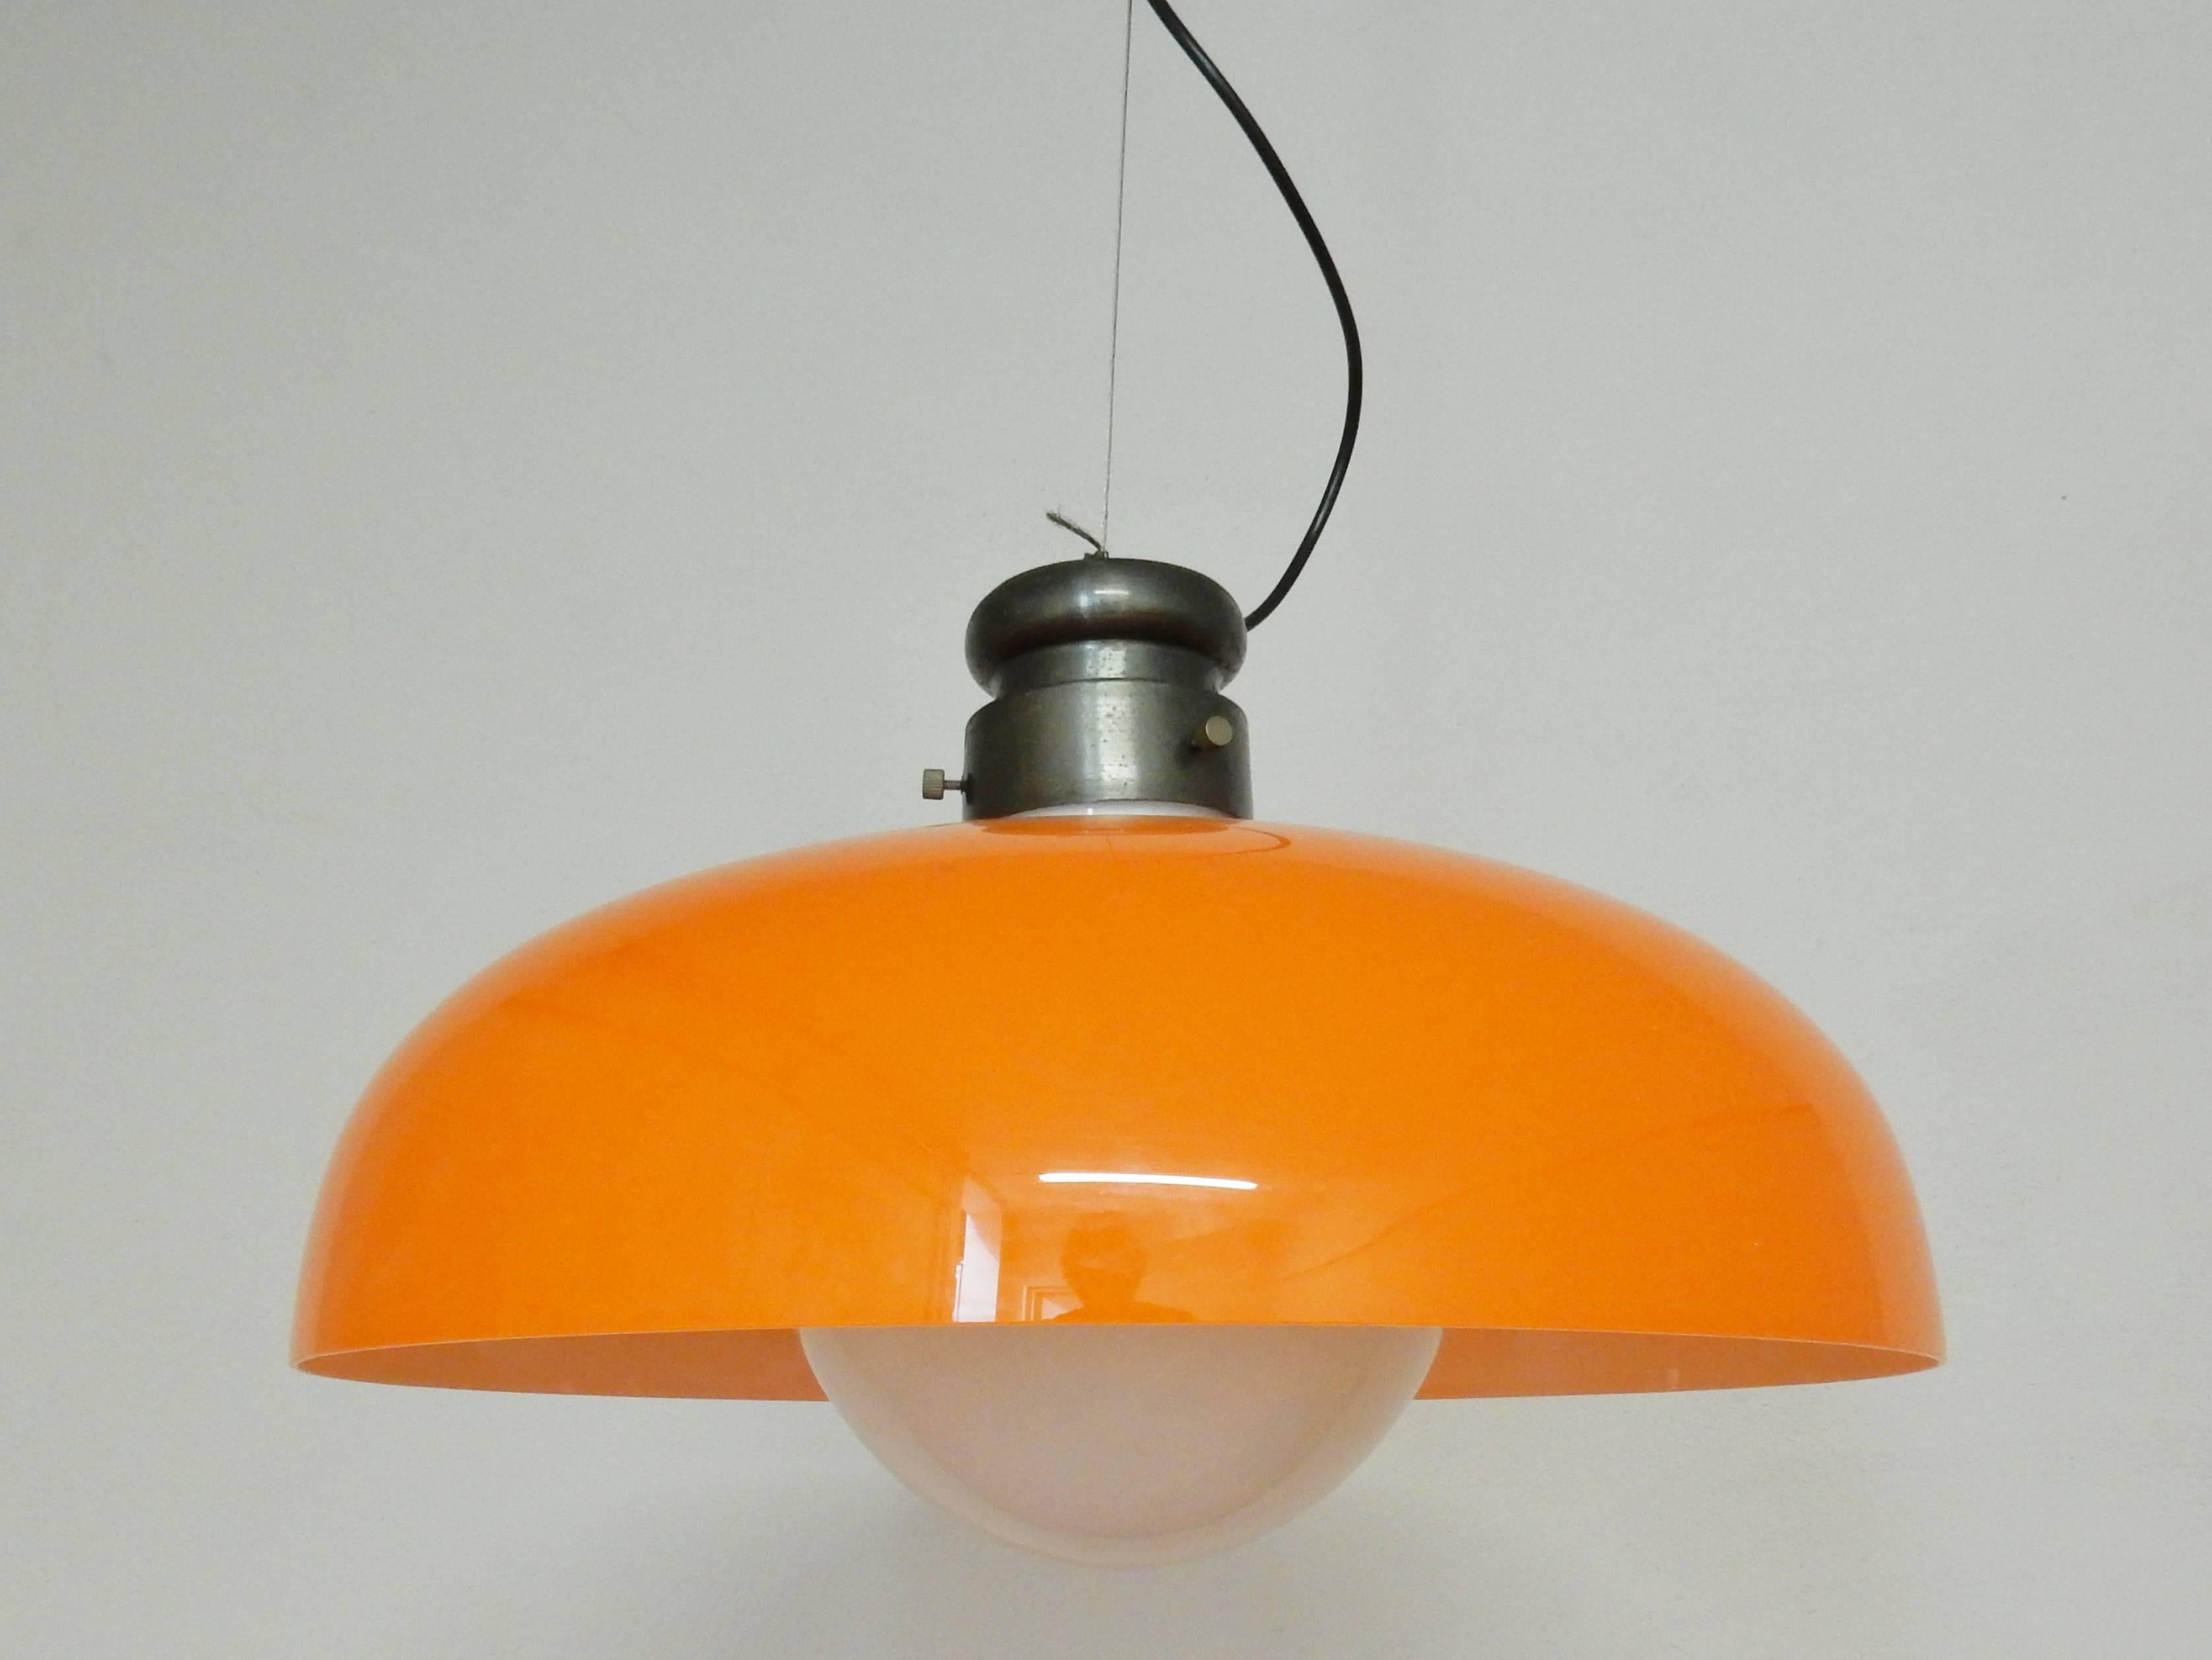 Rare pendant light by Gino Vistosi. This design is from the 1960s as we have it documented in a 1967 catalogue. But not the orange version, this color was added at a later time in the early 1970s. The documents mention Gino Vistosi being the